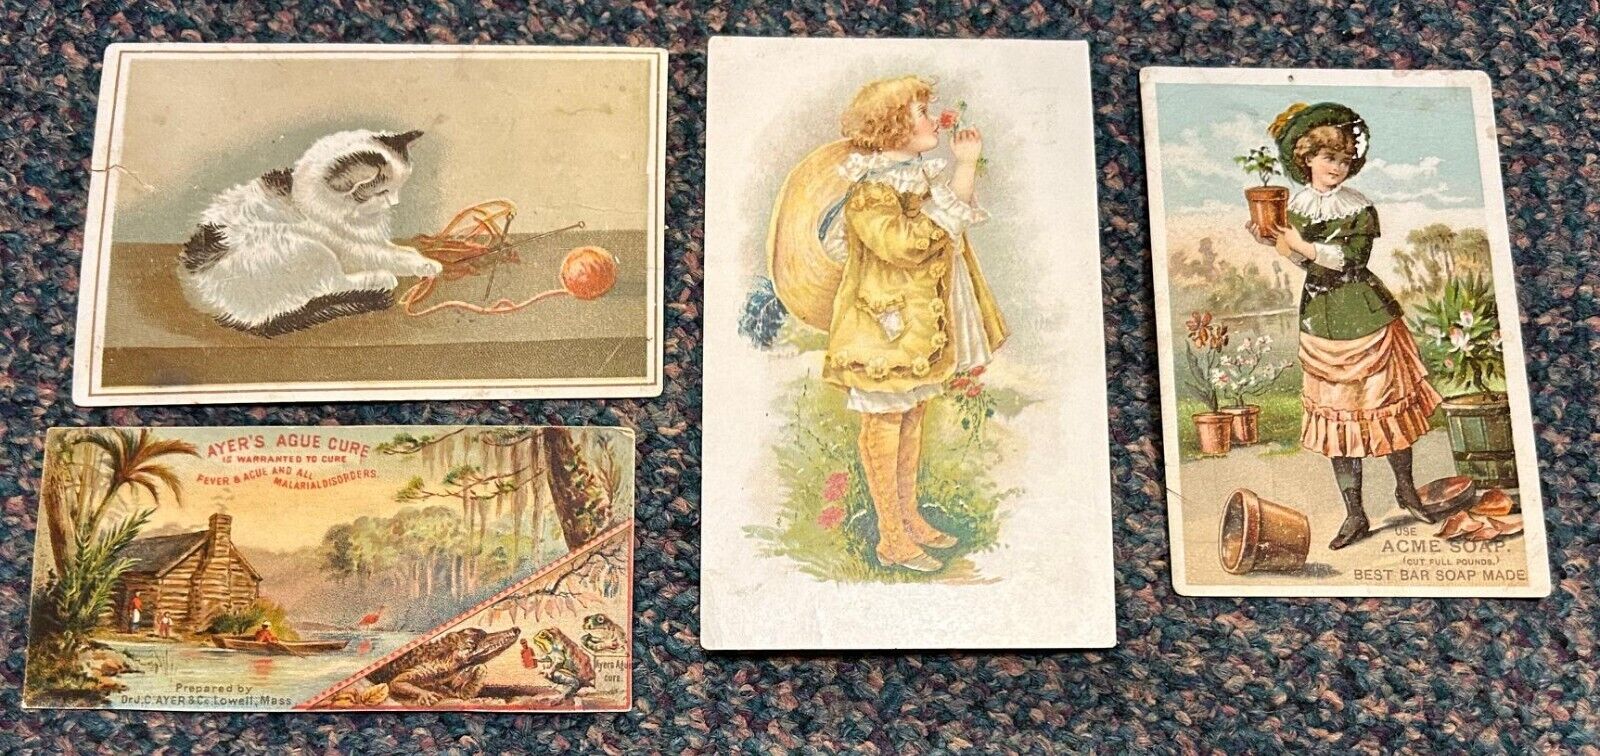 c1880s trade card group Royal Coffee Washburn Flour Lautz Soap Ayer's Cure